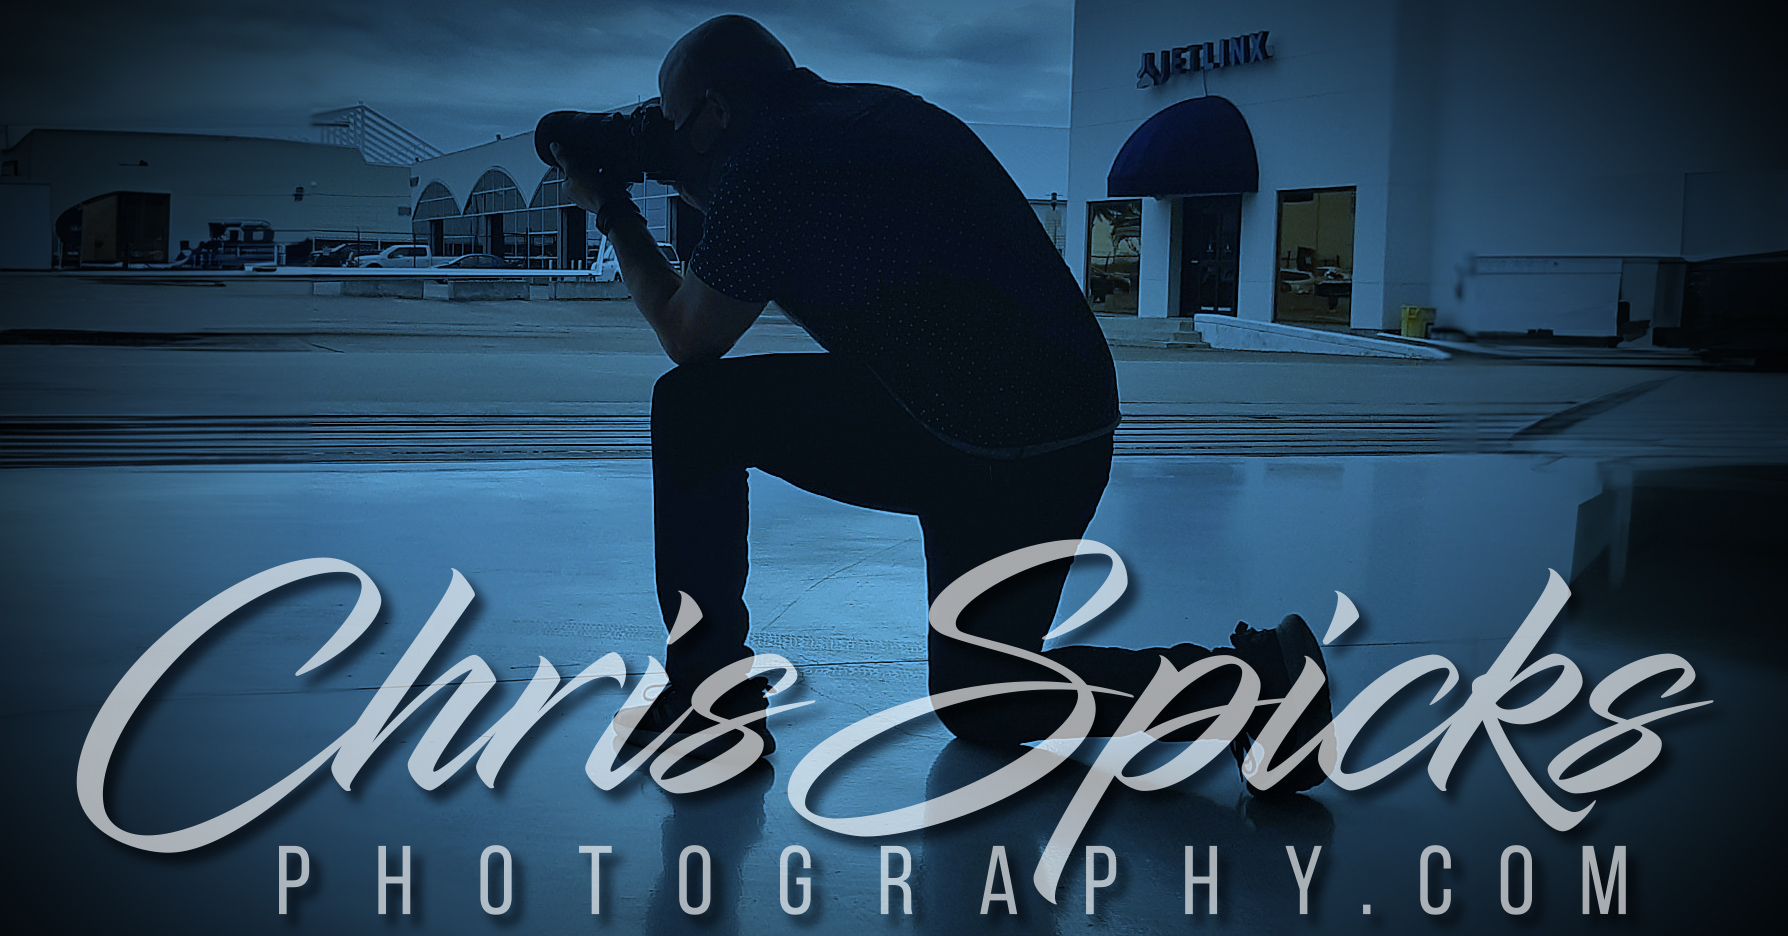 Experience the creativity and artistry of Chris Spicks Photography, the premier Houston photographer.